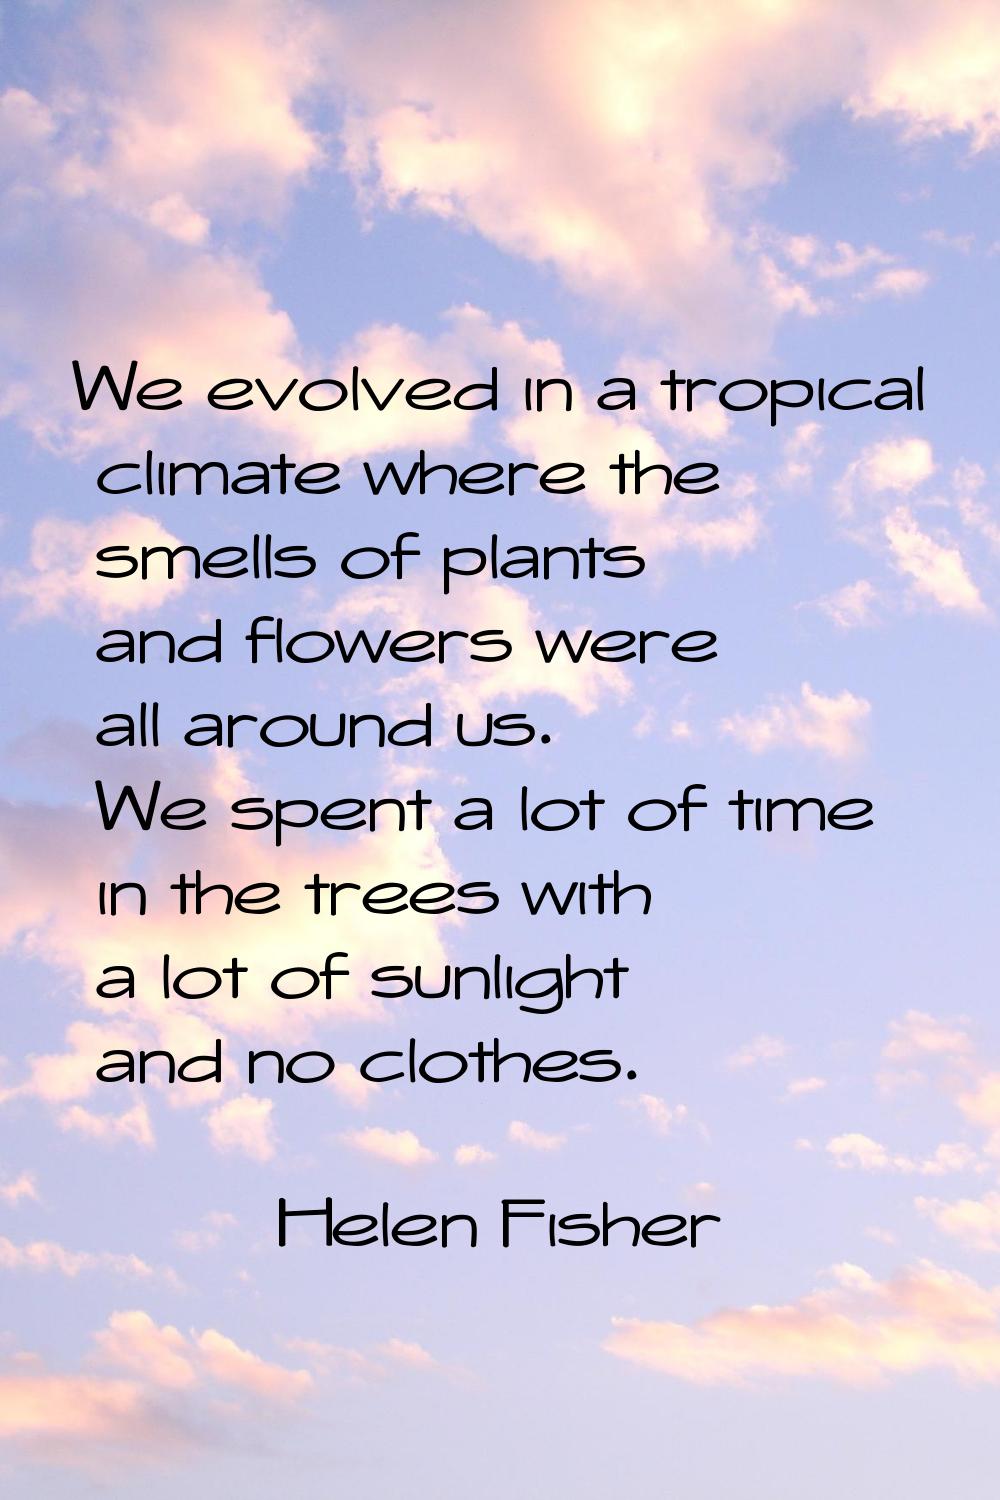 We evolved in a tropical climate where the smells of plants and flowers were all around us. We spen